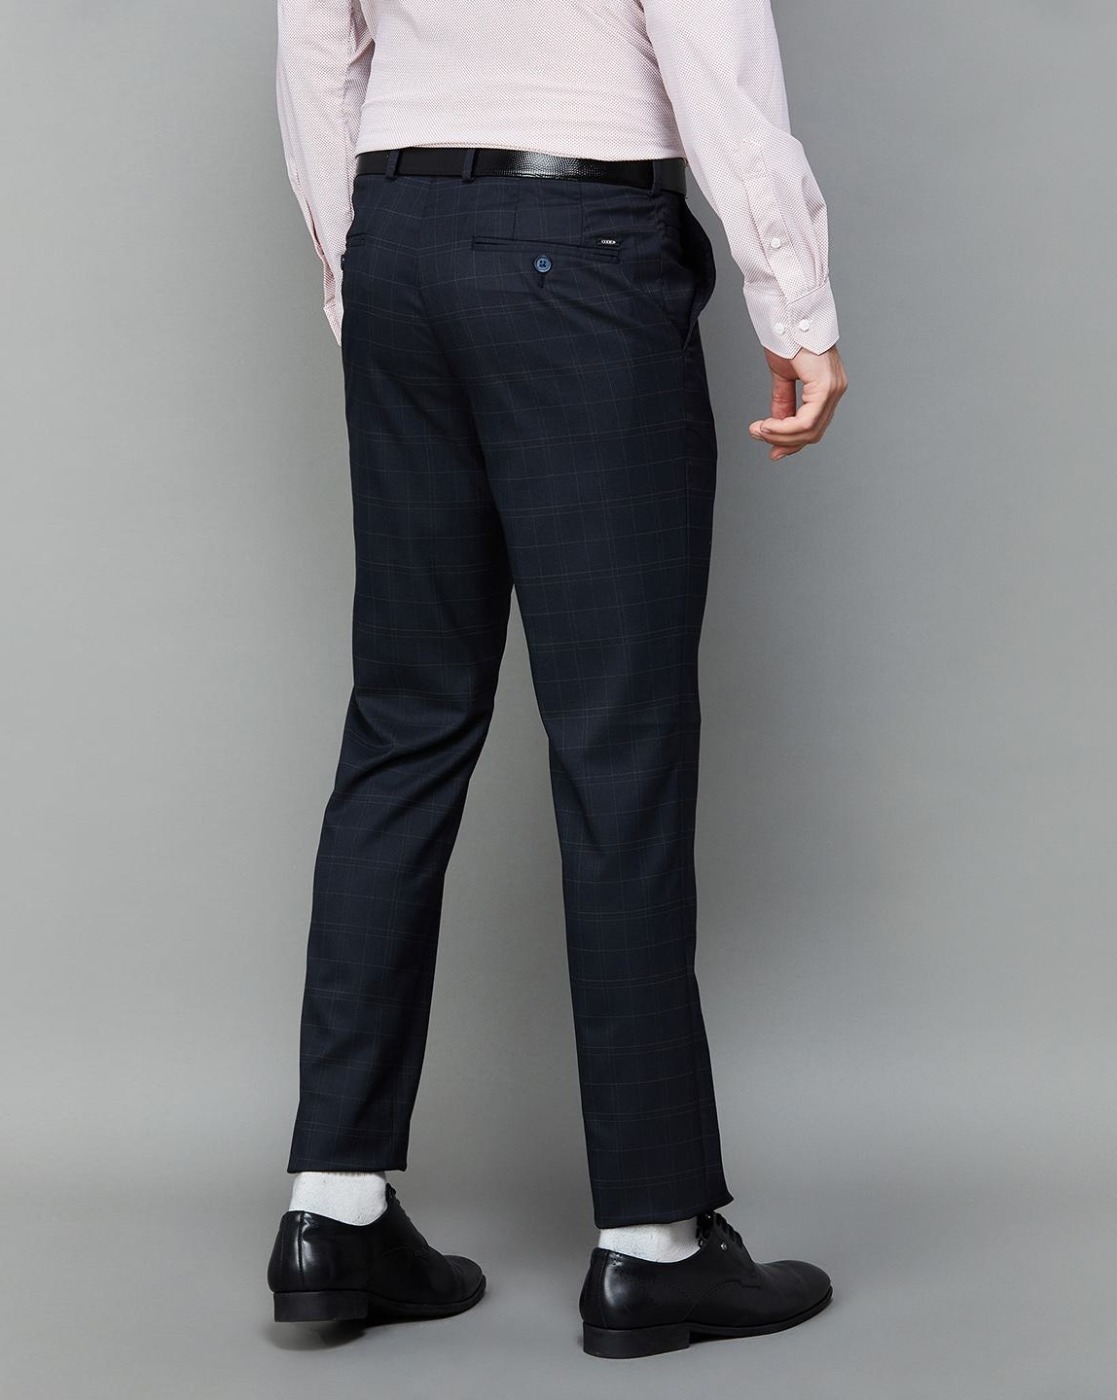 Buy Black Trousers & Pants for Men by CODE BY LIFESTYLE Online